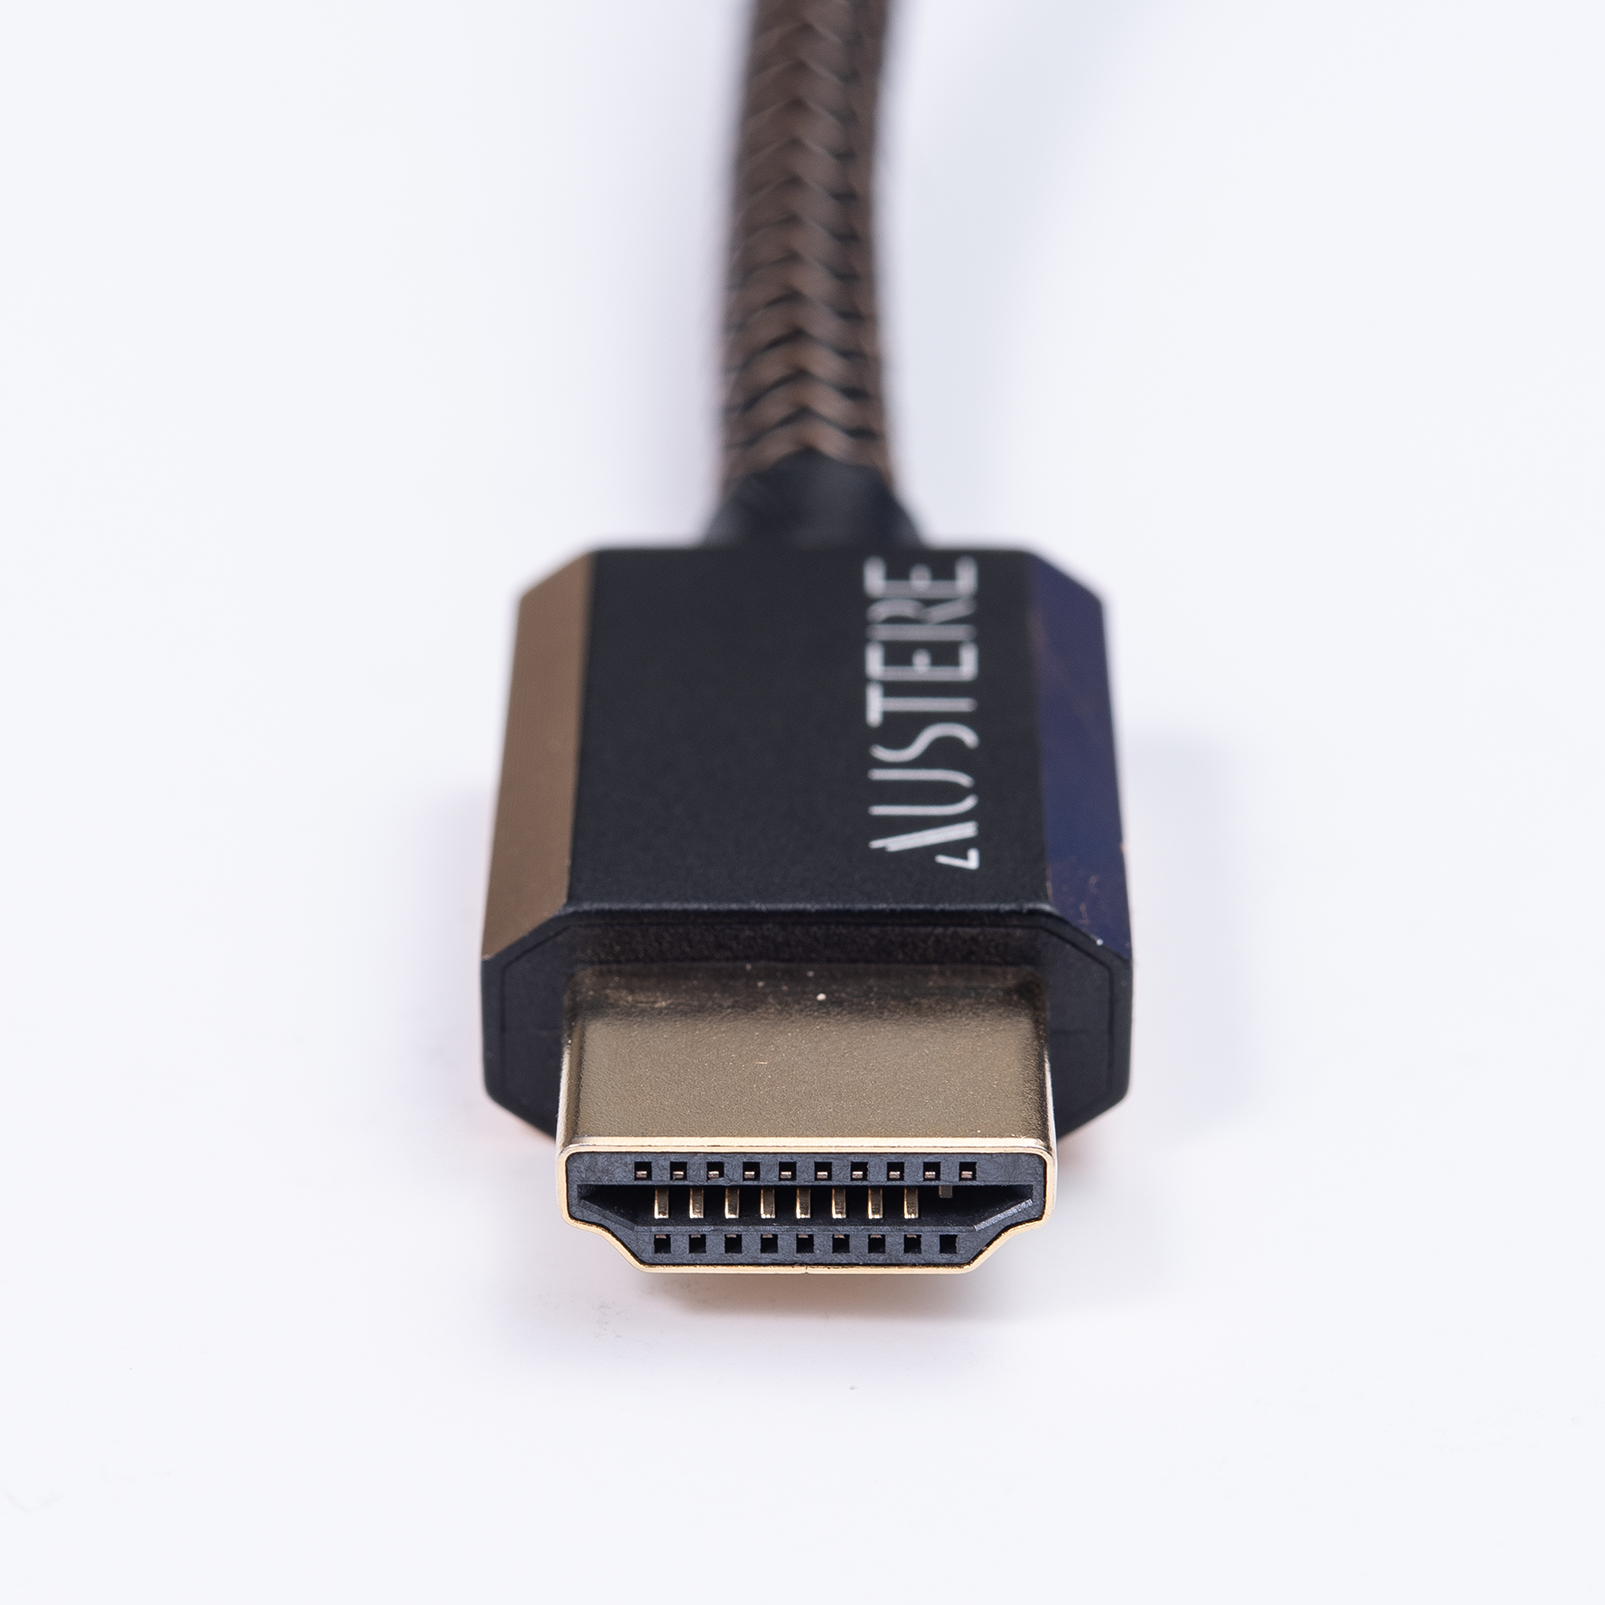 Austere III Series 4K Active HDMI Cable 5.0m - Black - Austere III series 4K active HDMI 5.0m cable - Left